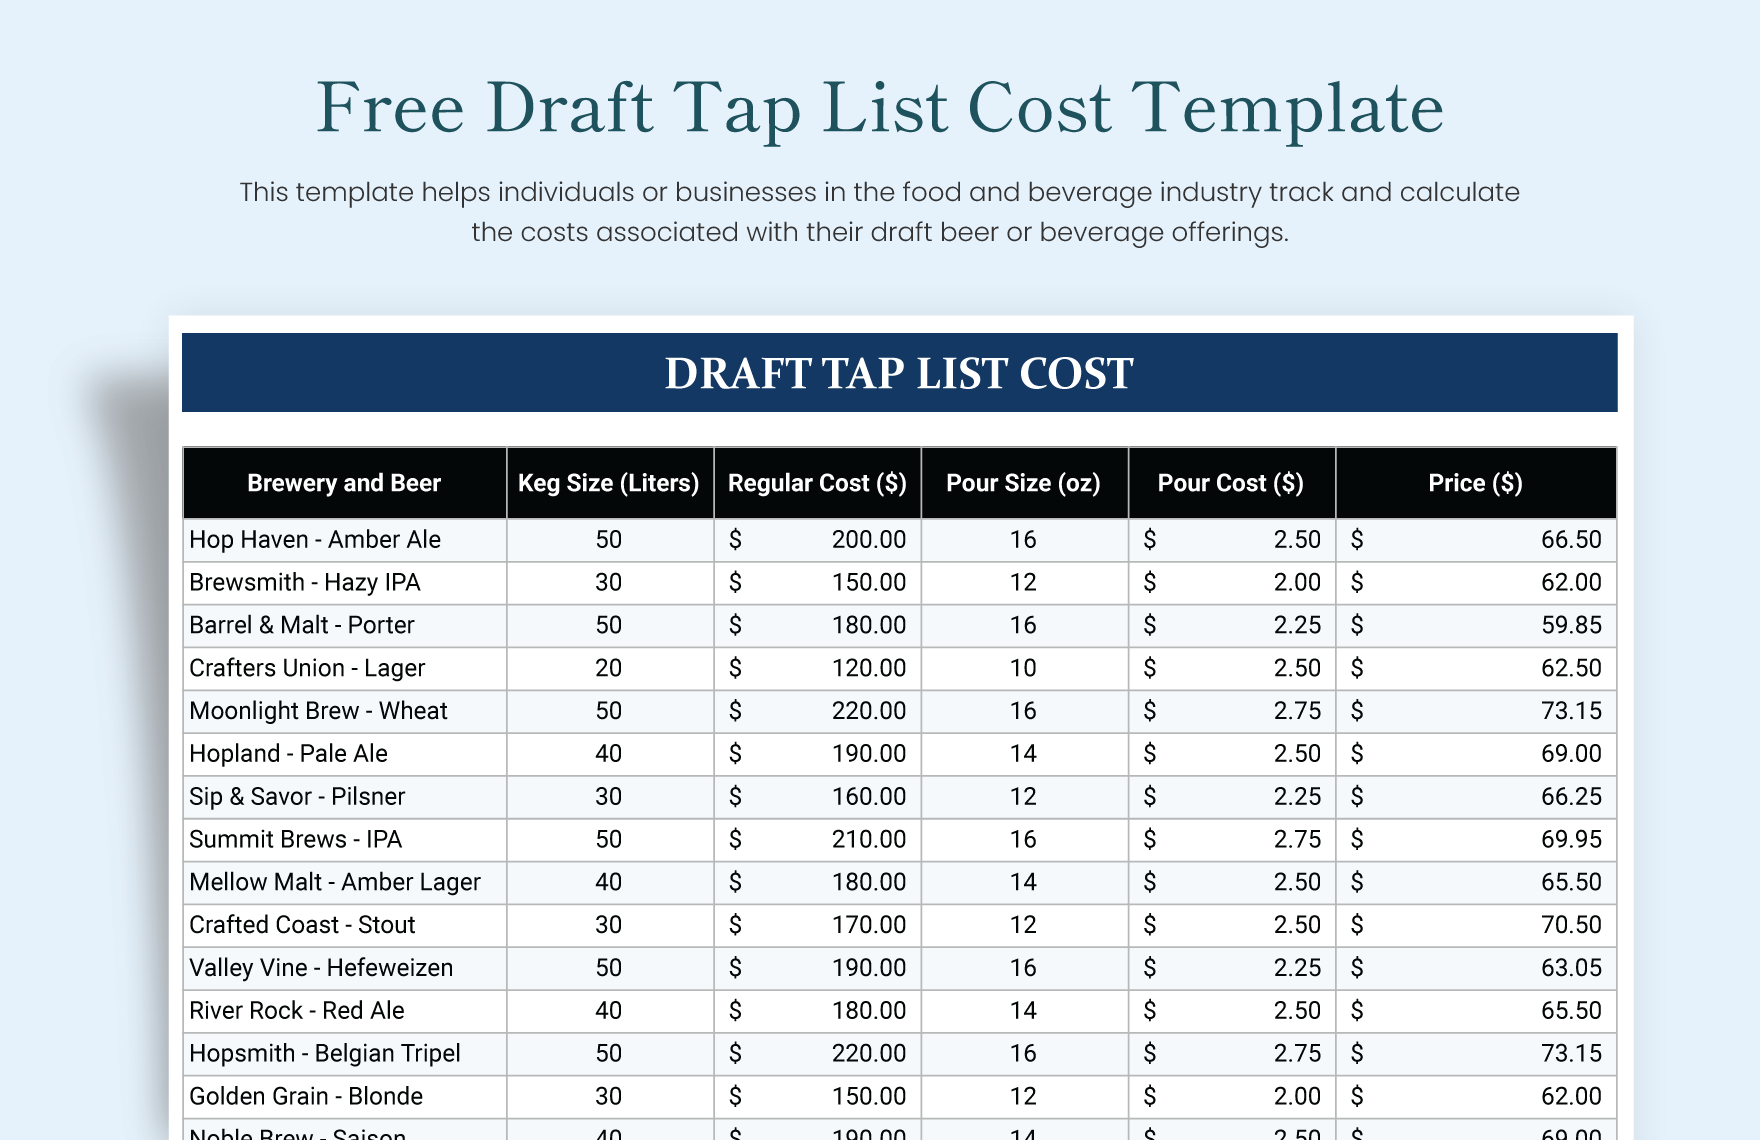 Free Draft Tap List Cost Template in Excel, Google Sheets